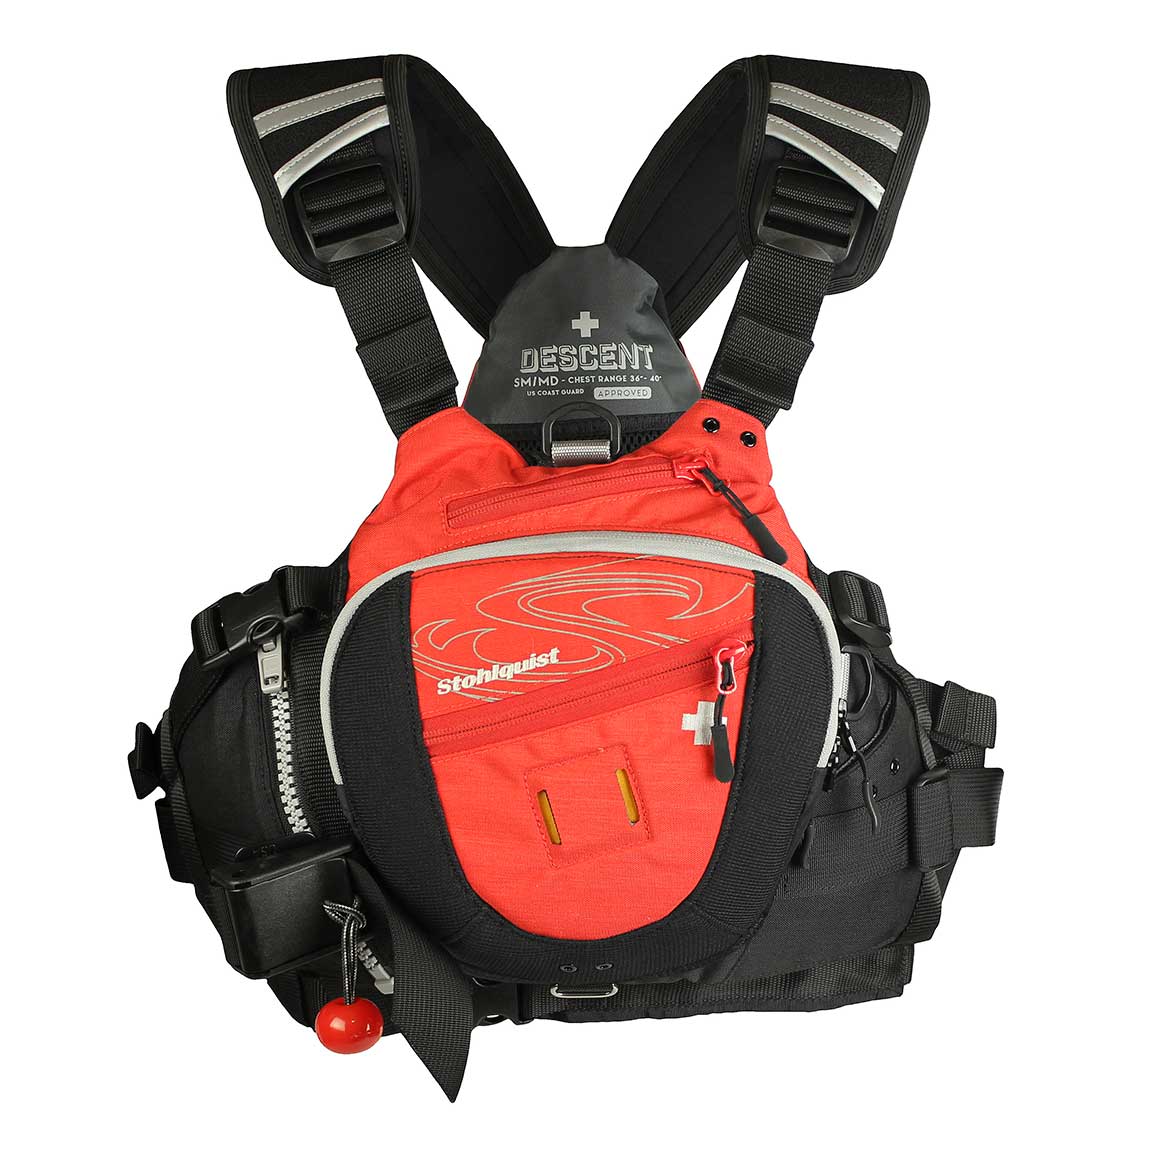 Featuring the Descent Rescue PFD gift for kayaker, gift for rafter, rescue pfd manufactured by Stohlquist shown here from one angle.